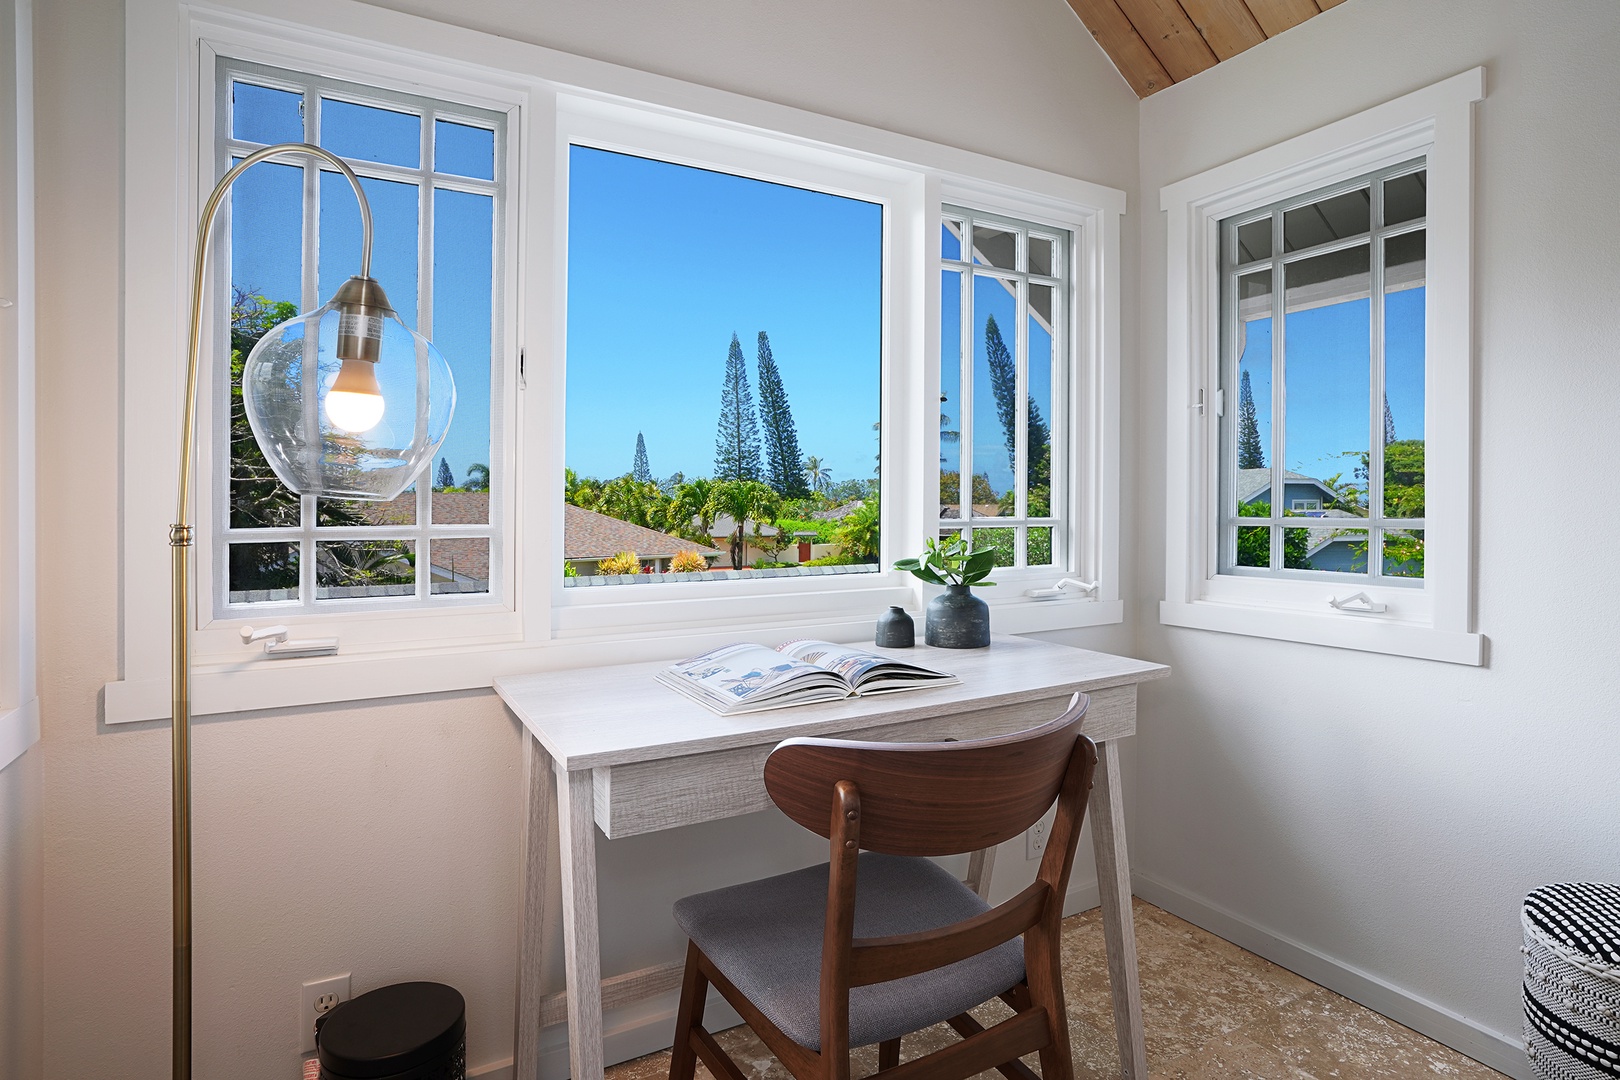 Princeville Vacation Rentals, Kaiana Villa - There is also a small office on the top floor where you can get some work done trying to not distracted by the incredible views!